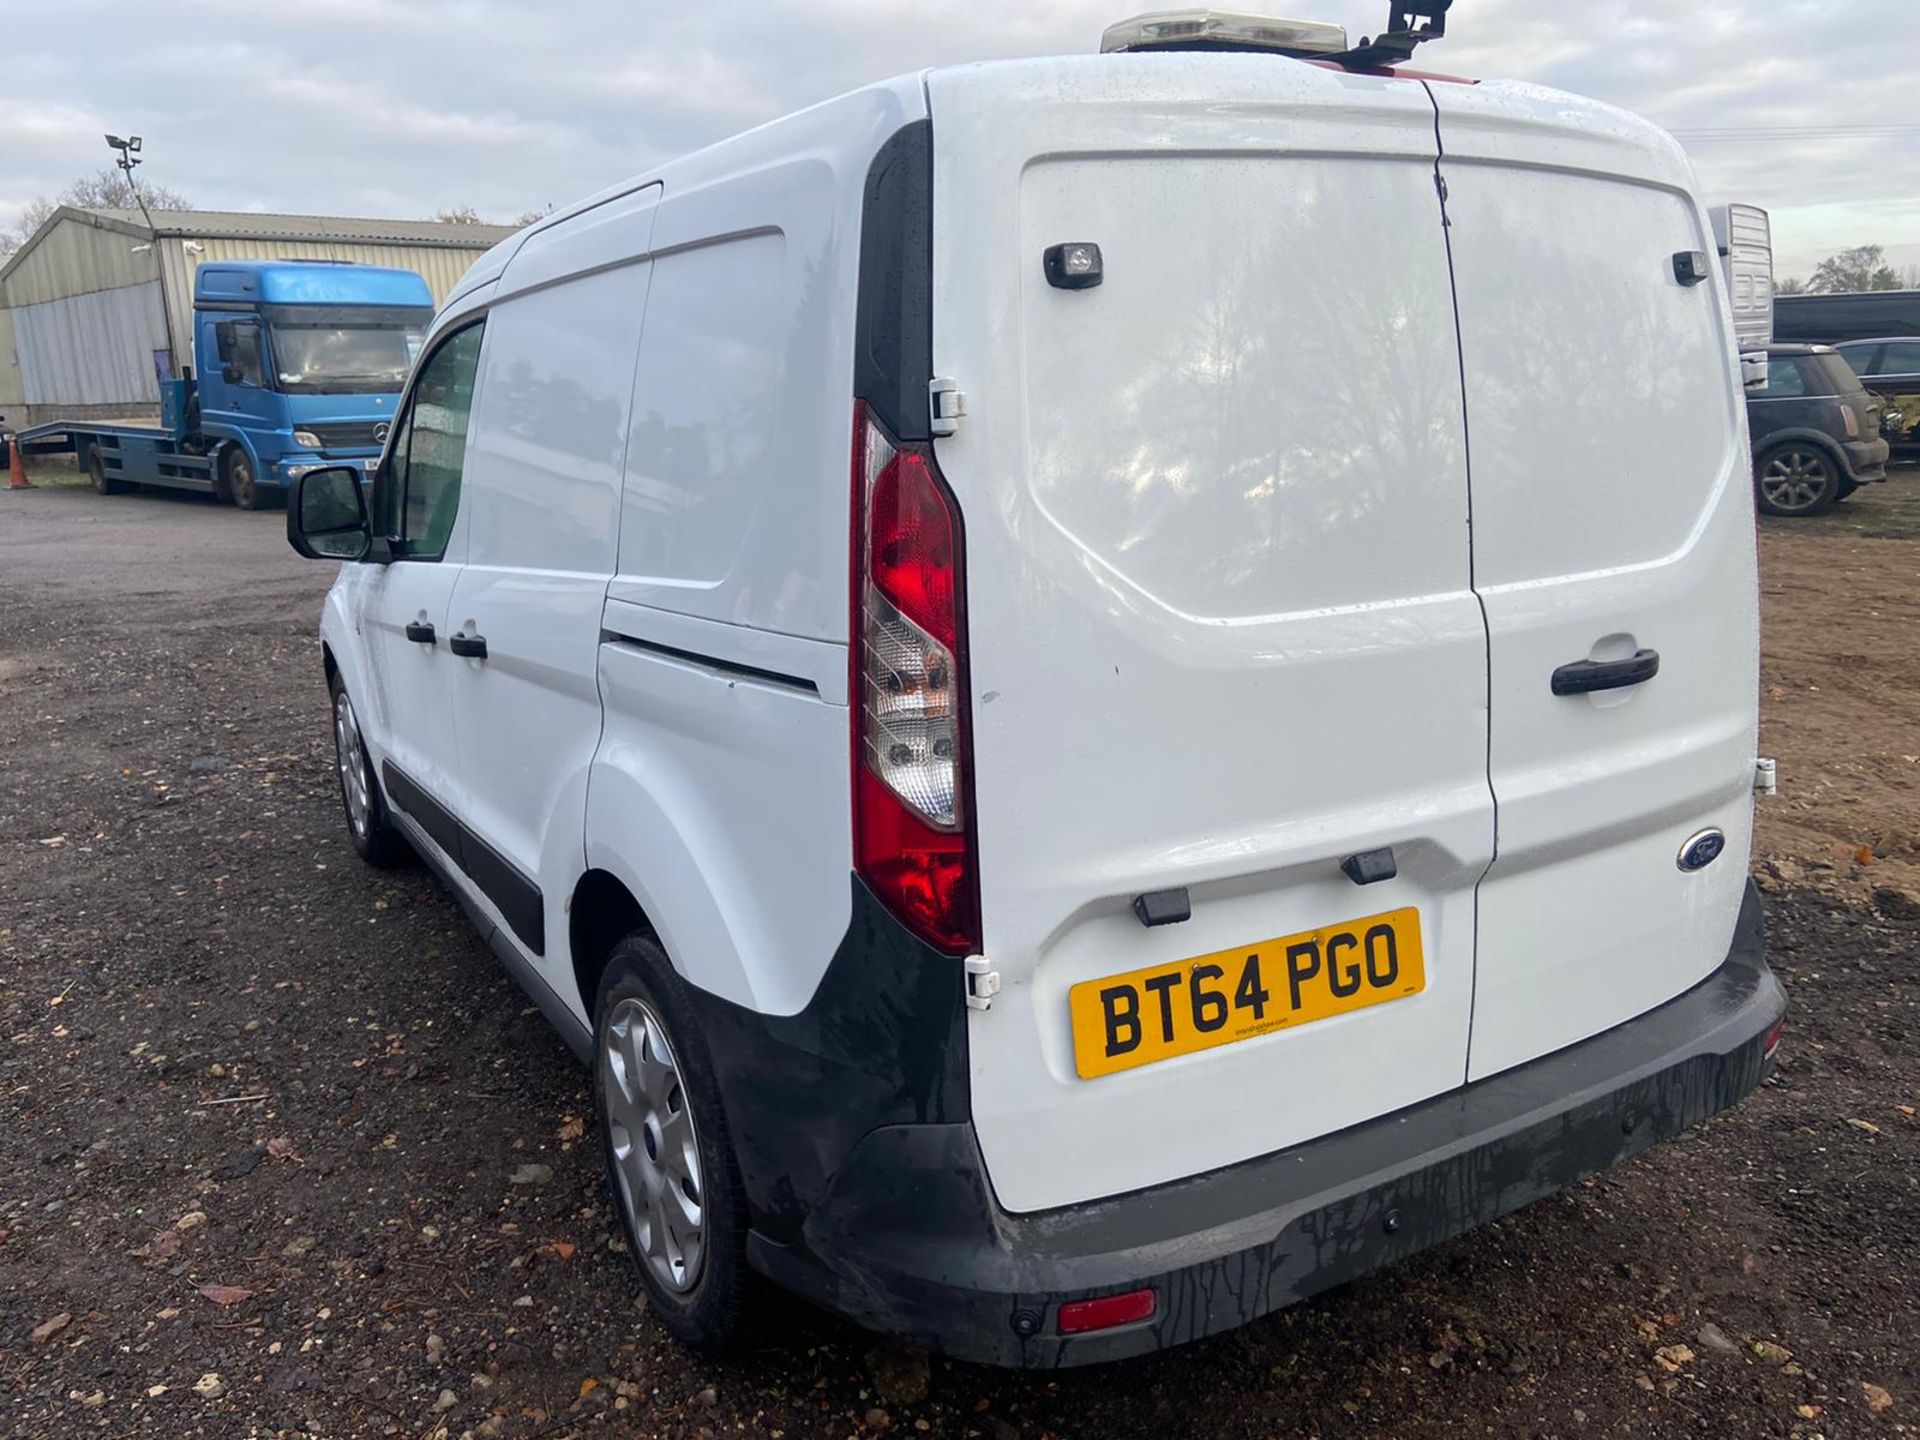 2015/64 REG FORD TRANSIT CONNECT 200 ECONETIC 1.6 DIESEL WHITE PANEL VAN, SHOWING 0 FORMER KEEPERS - Image 7 of 10